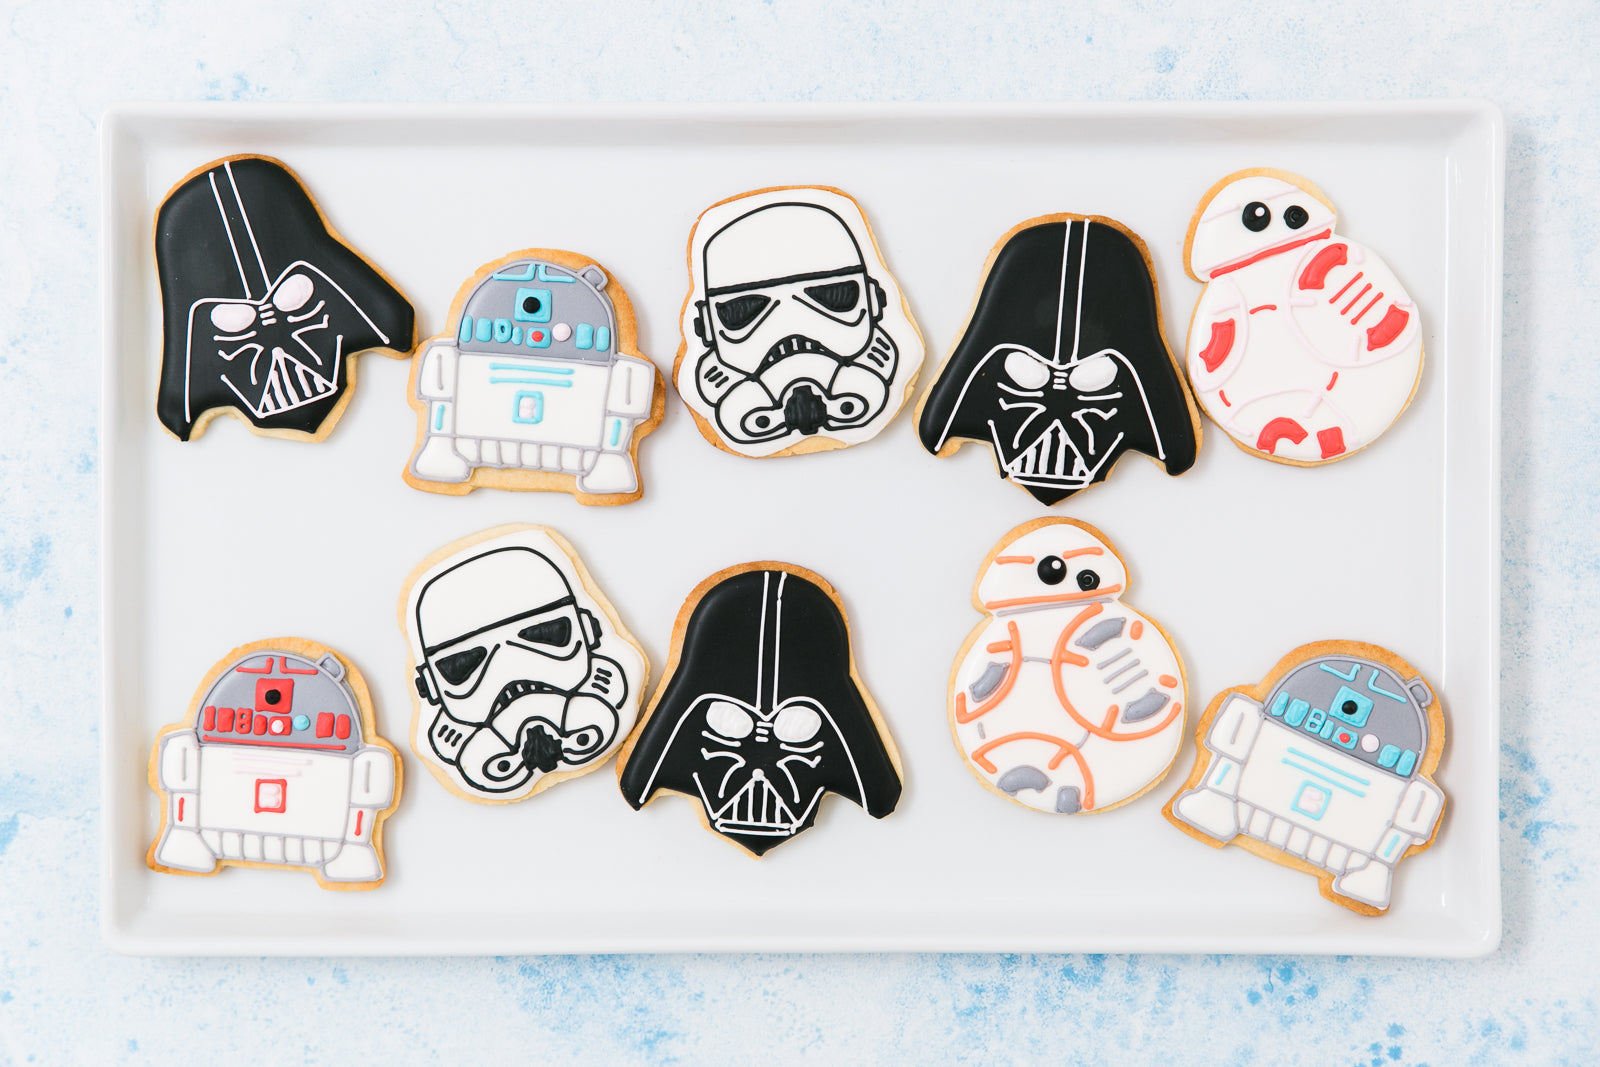 Star Wars party ideas for a boy's birthday party. 